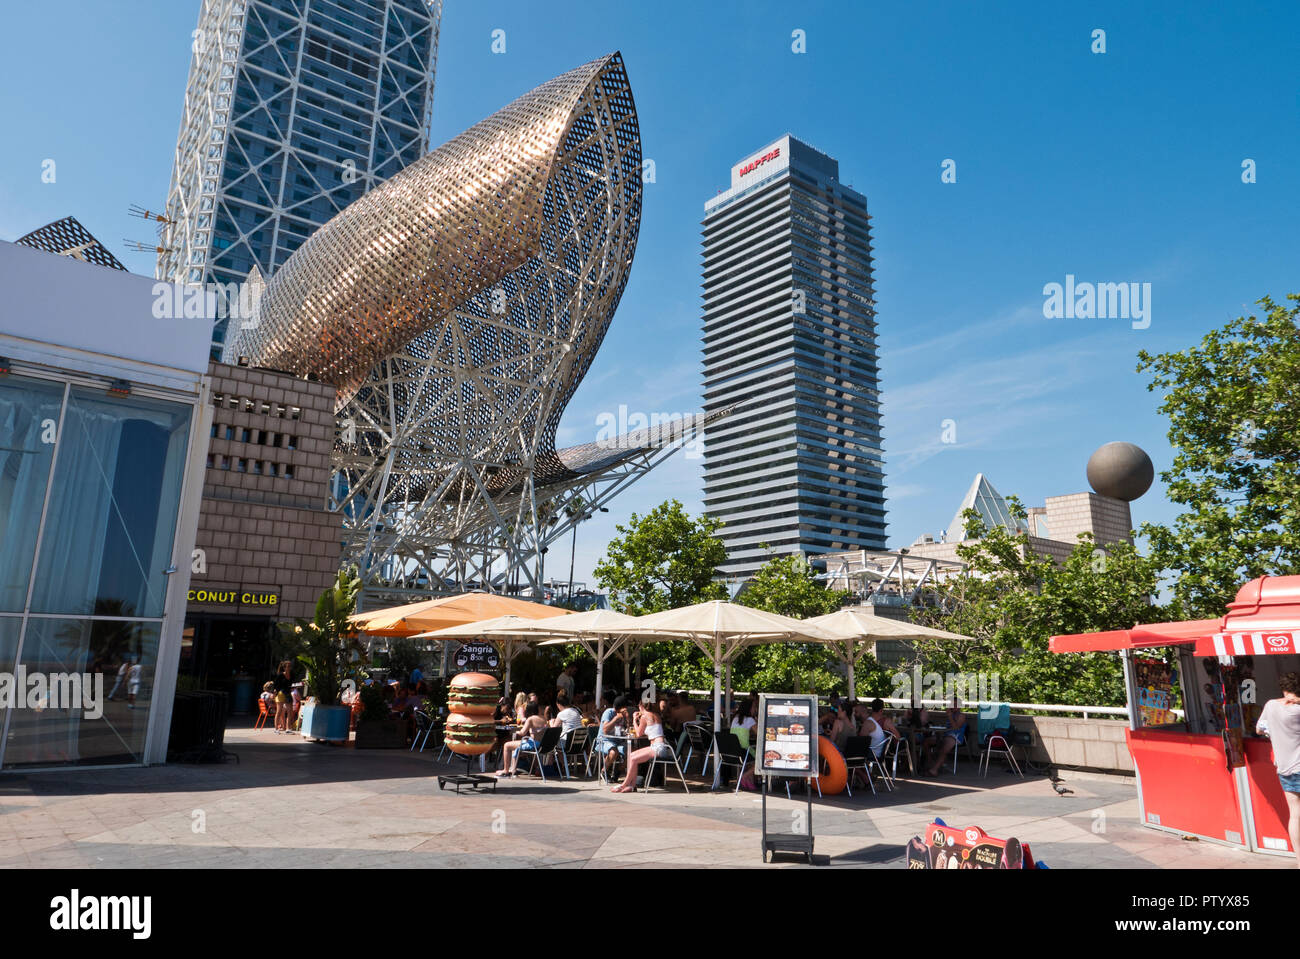 The golden fish sculpture designed by architect Frank O. Gehry, Port Olimpic, Barcelona, Spain Stock Photo